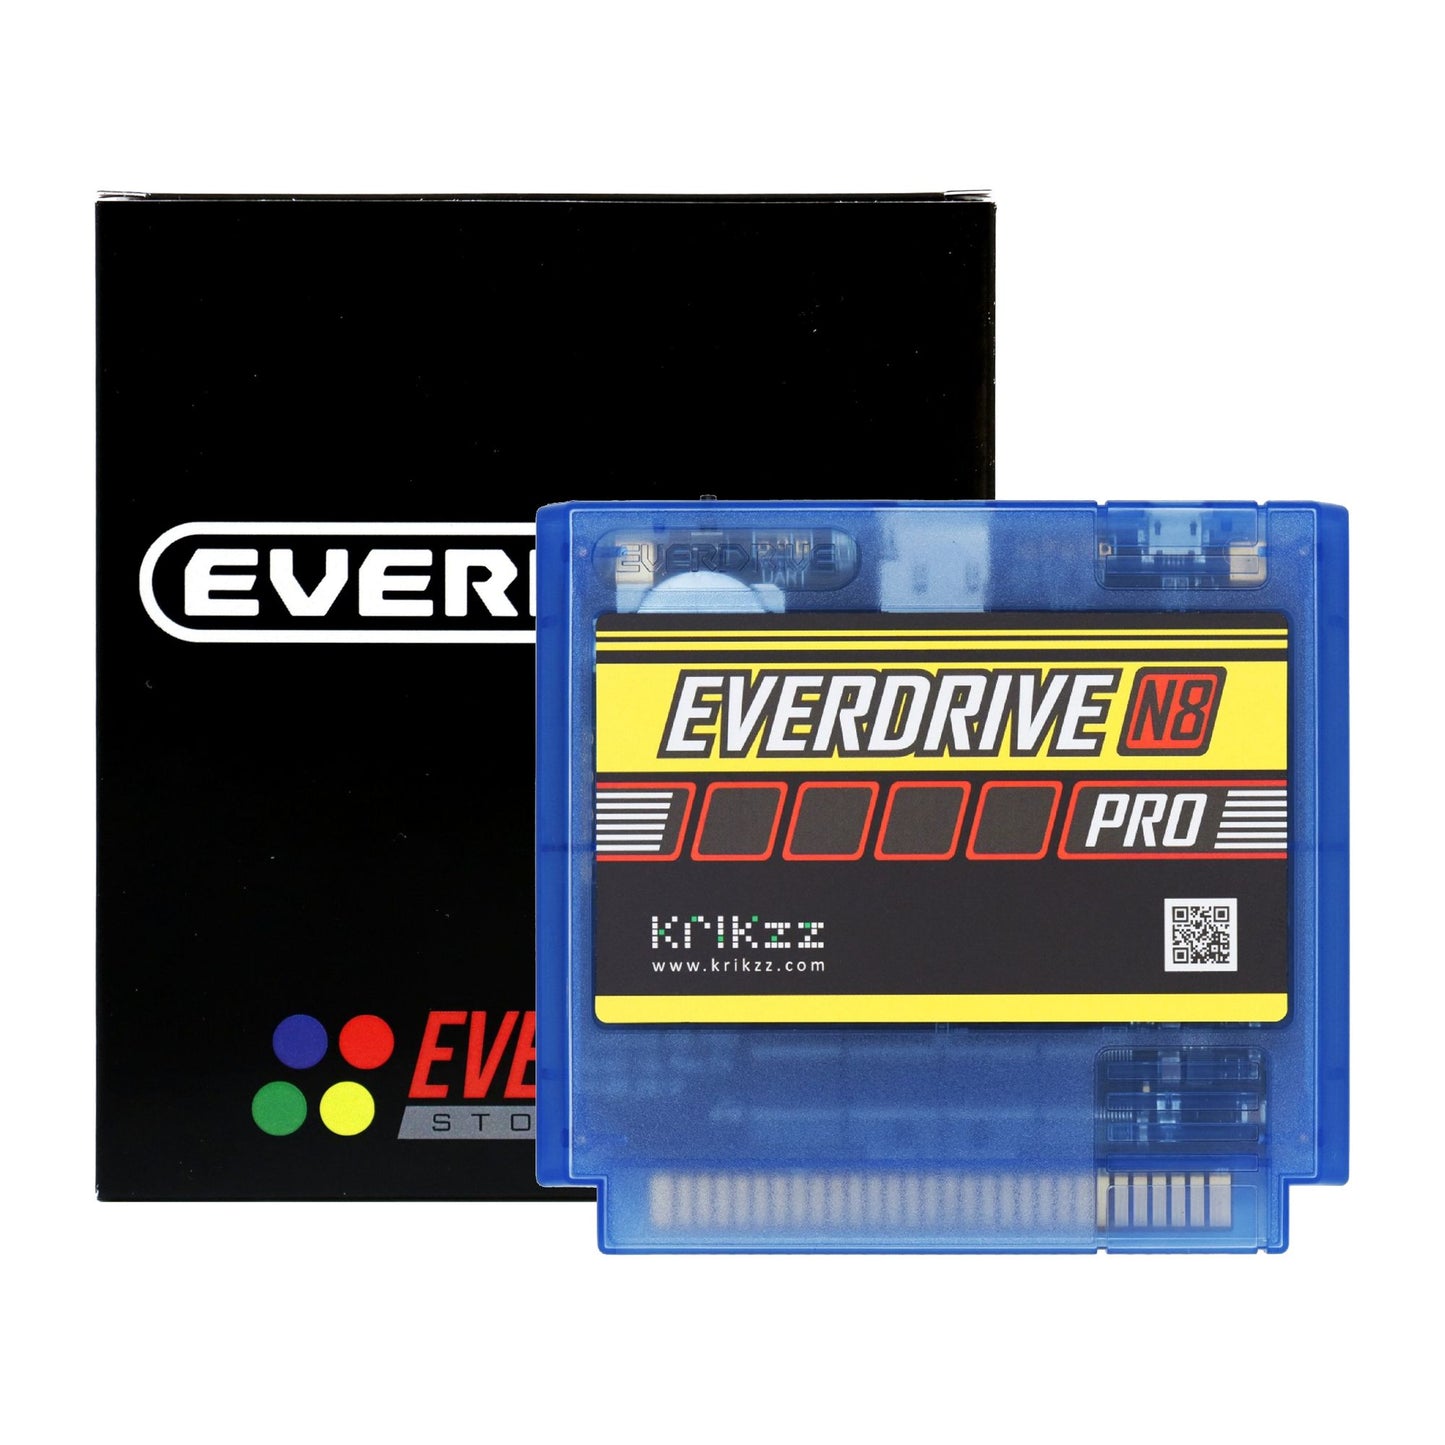 Everdrive N8 Famicom PRO - Frosted Blue